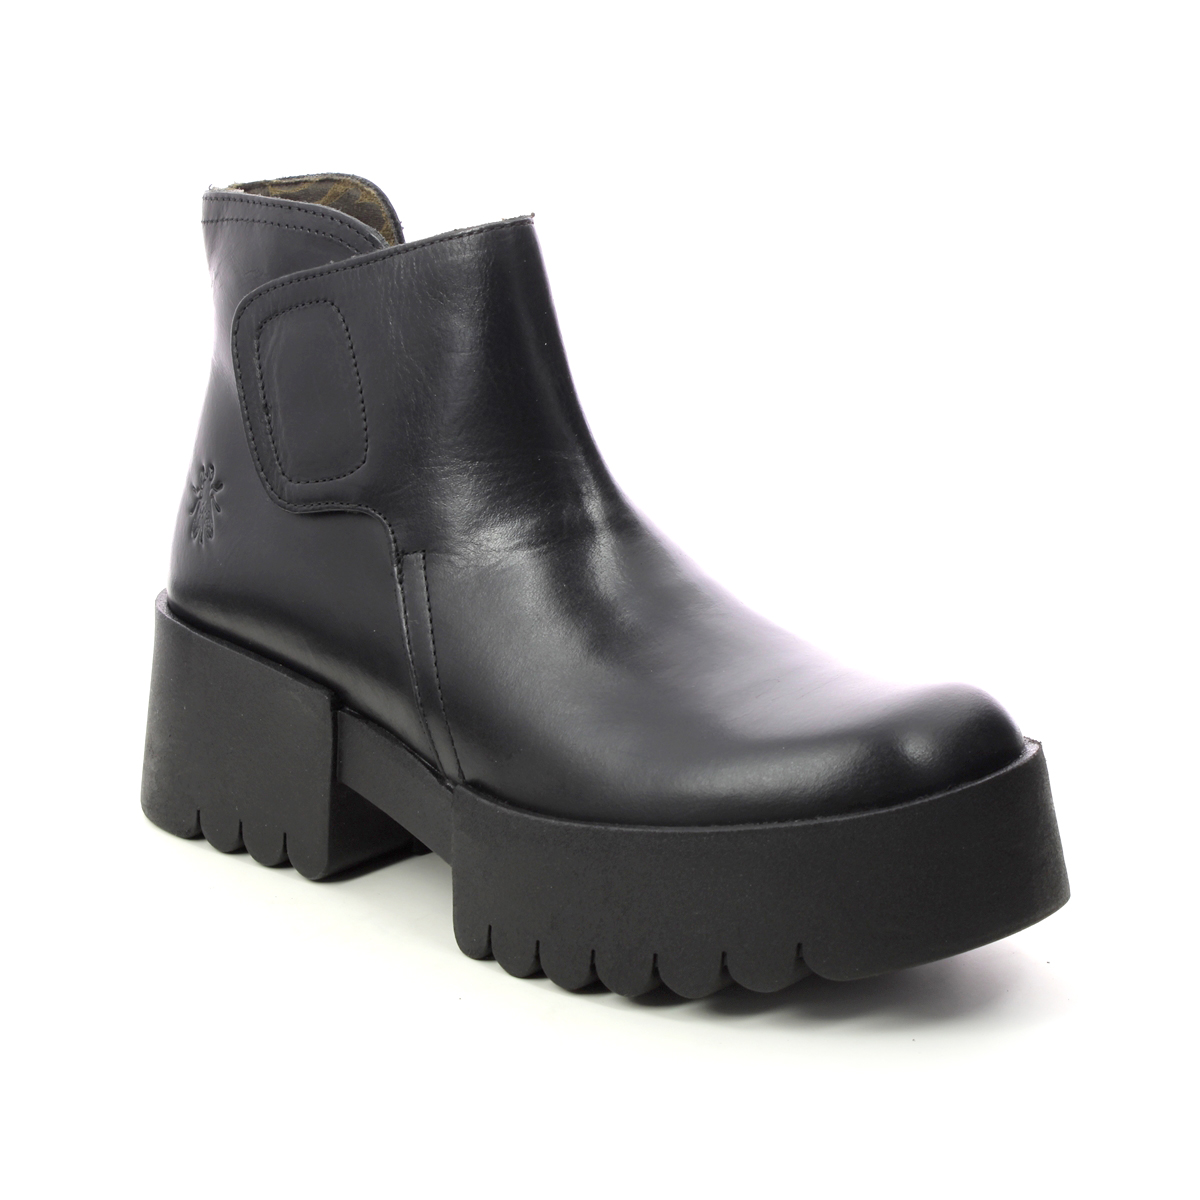 Fly London Endo   Esme Black Leather Womens Wedge Boots P145006 In Size 37 In Plain Black Leather